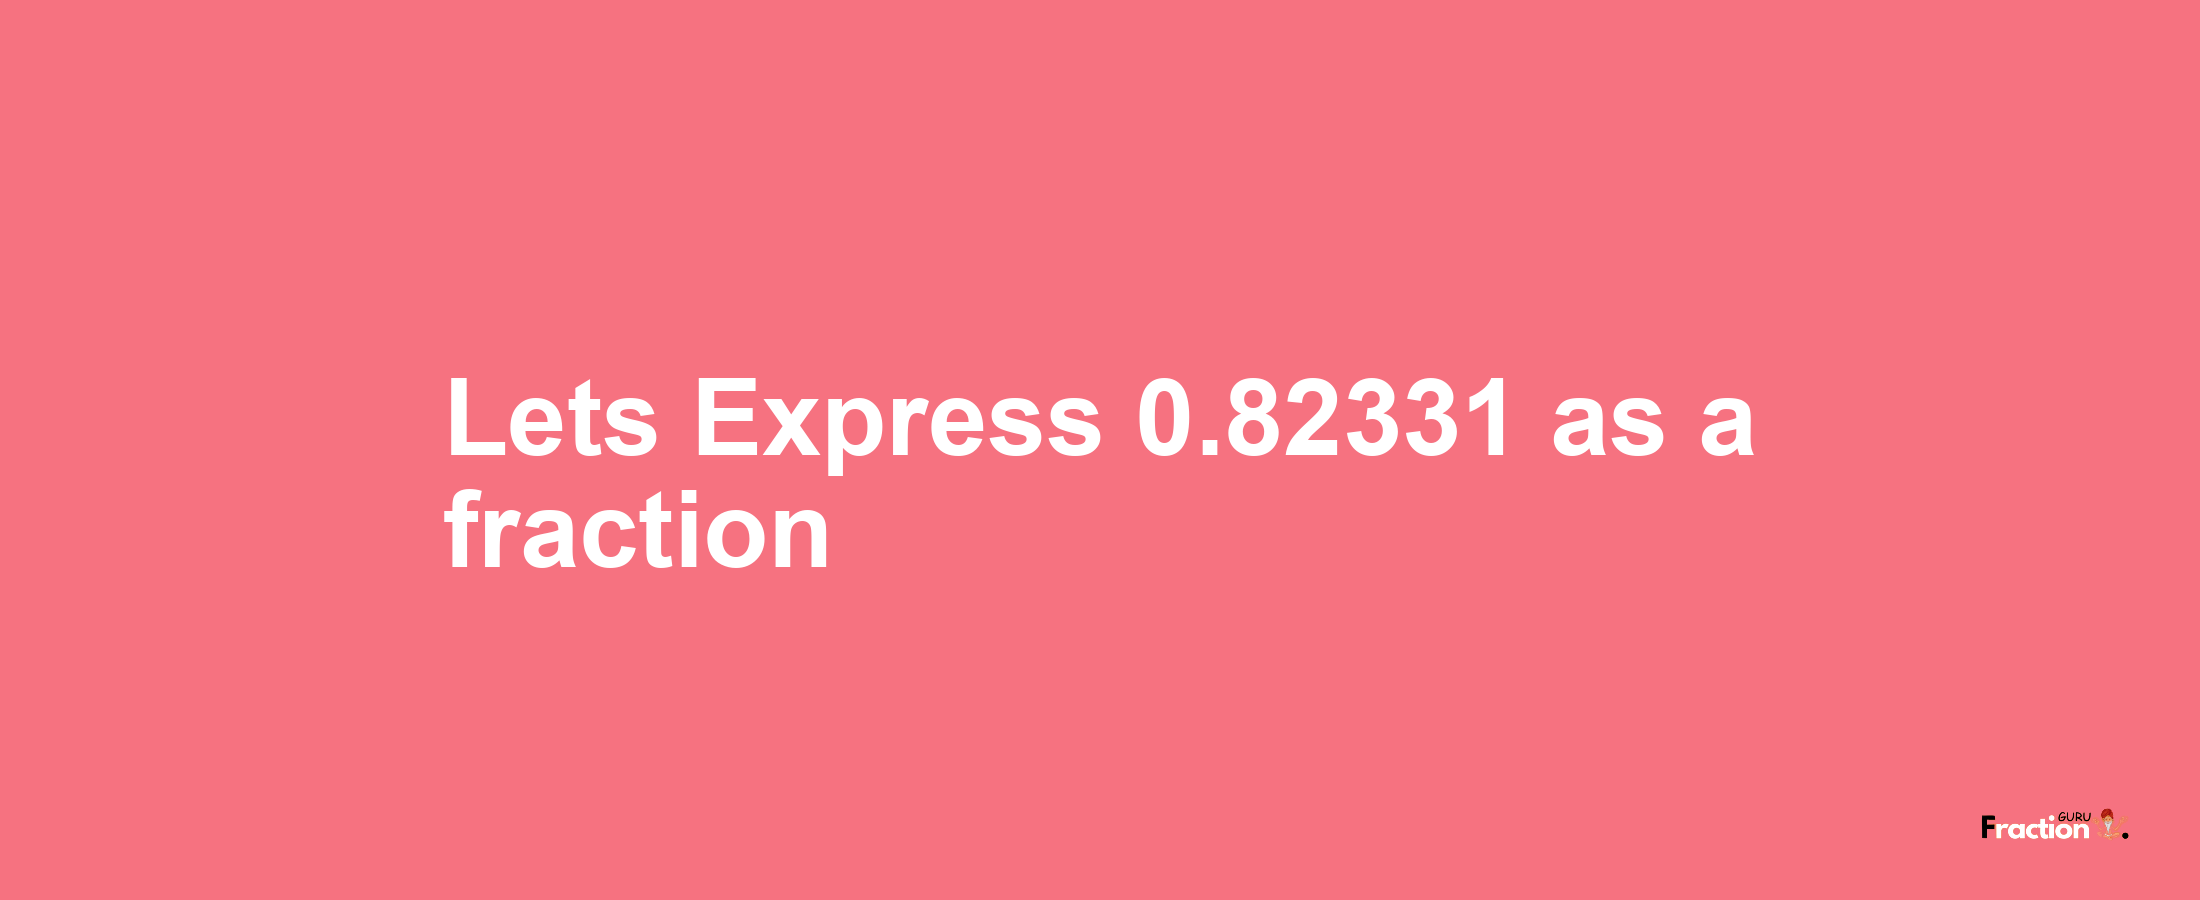 Lets Express 0.82331 as afraction